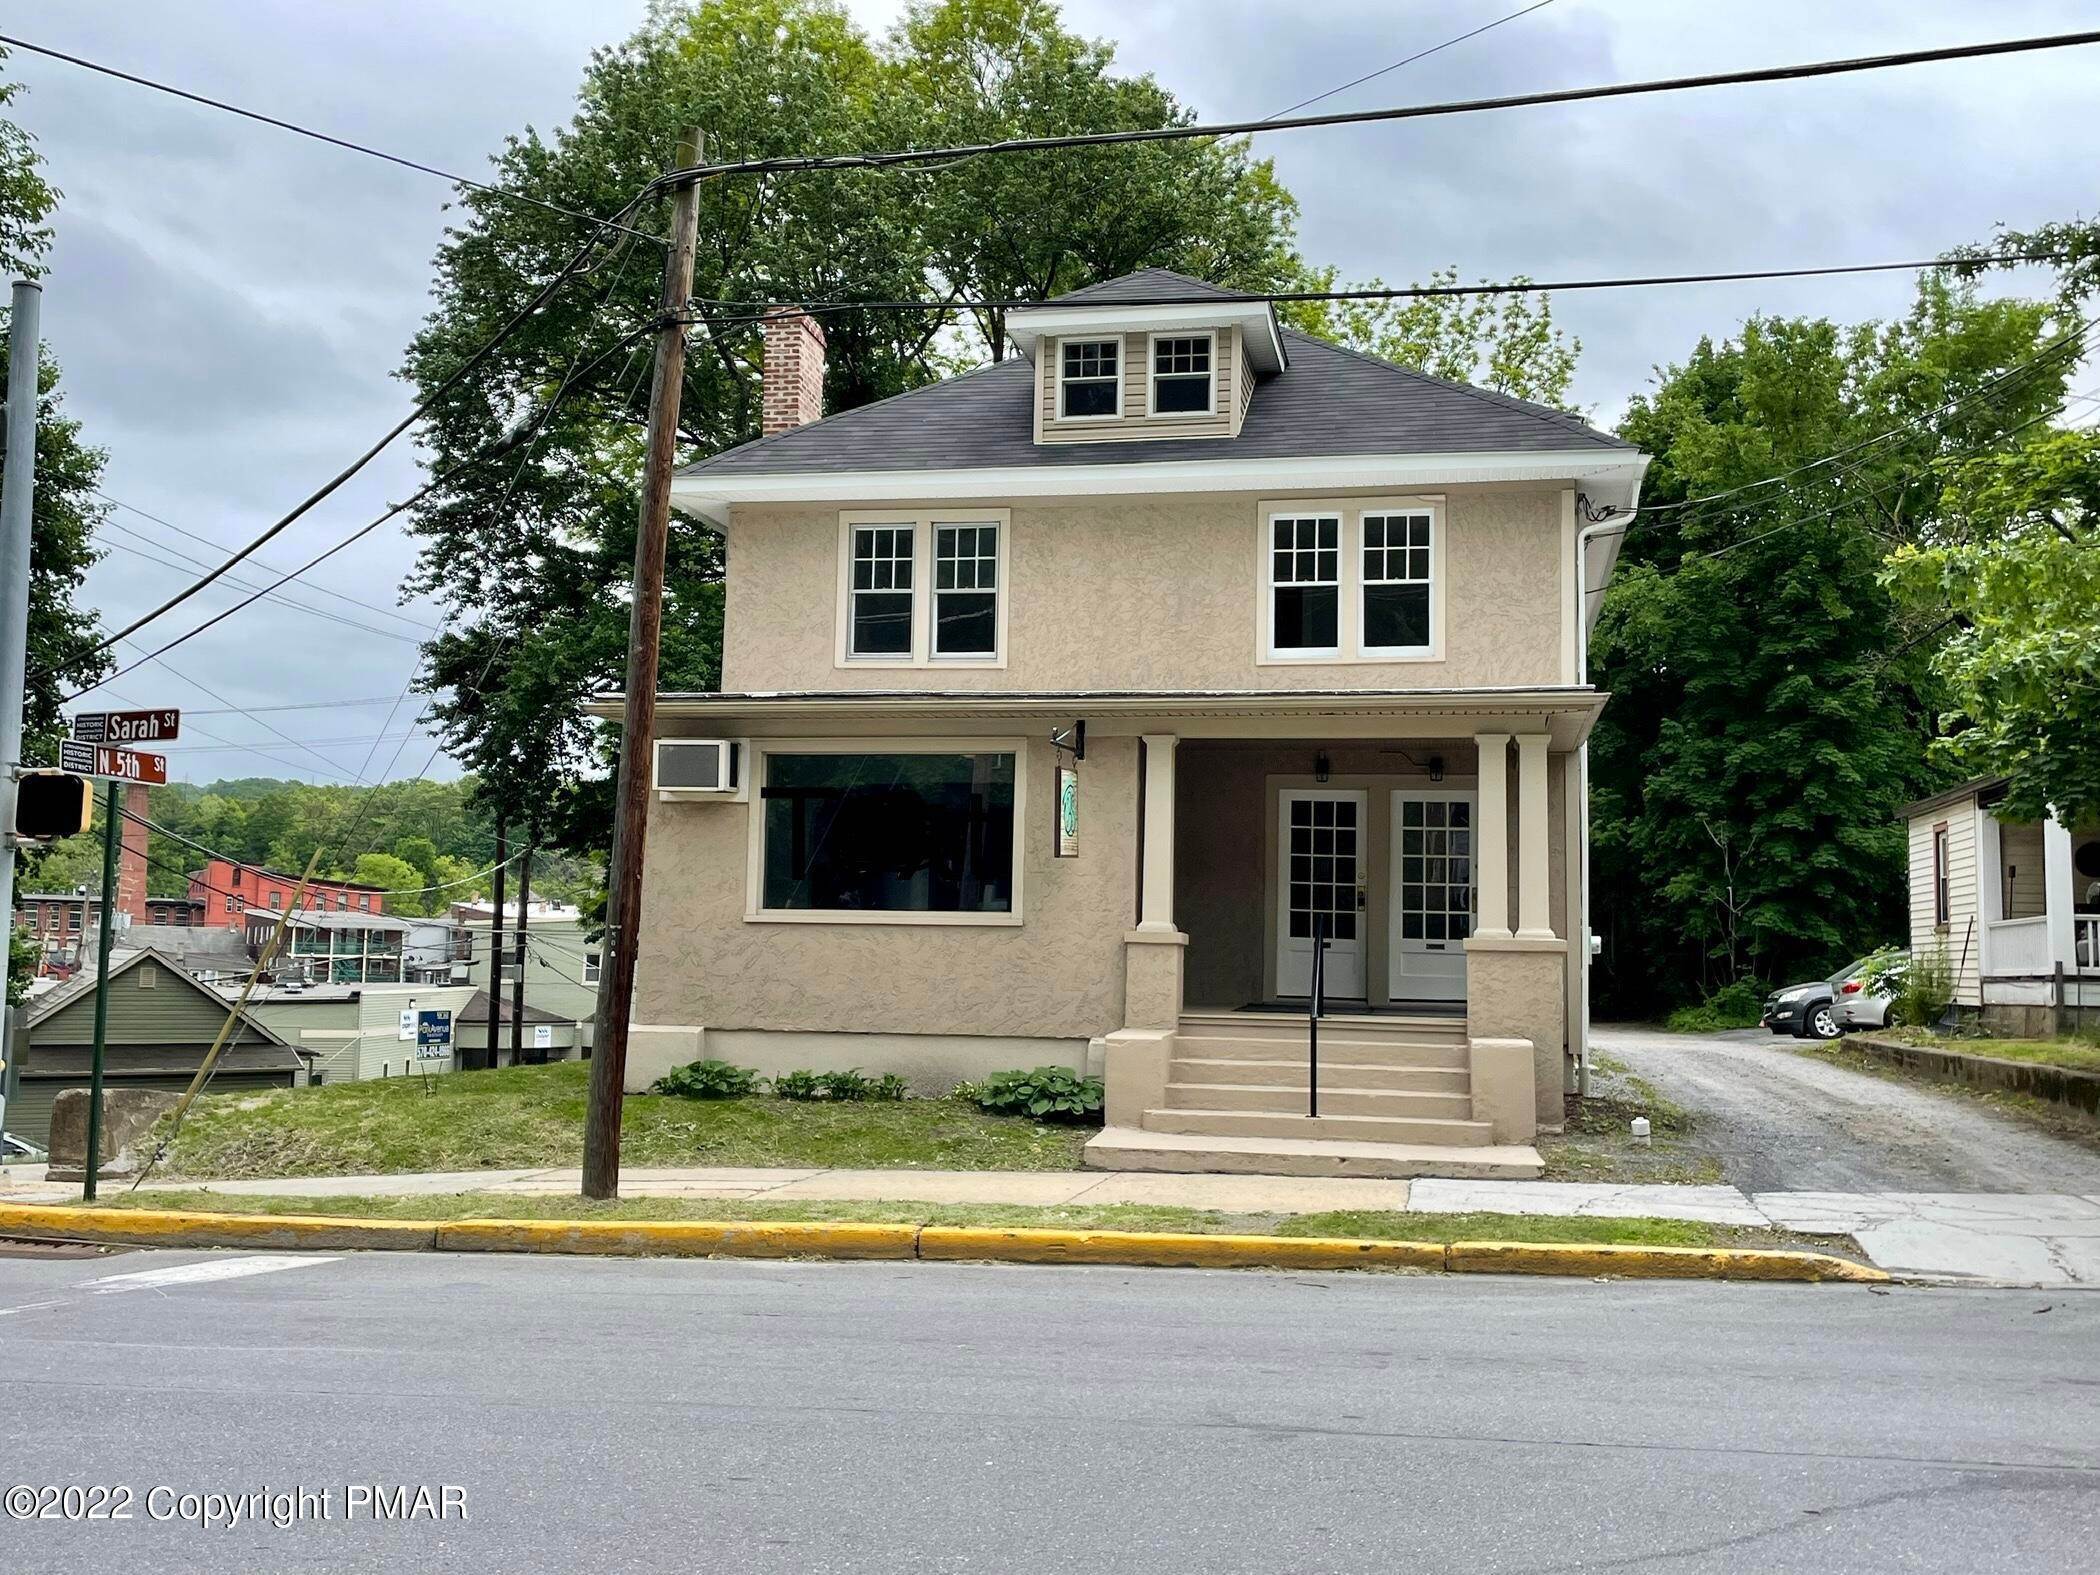 24. Single Family Homes for Sale at 501 Sarah St Stroudsburg, Pennsylvania 18360 United States